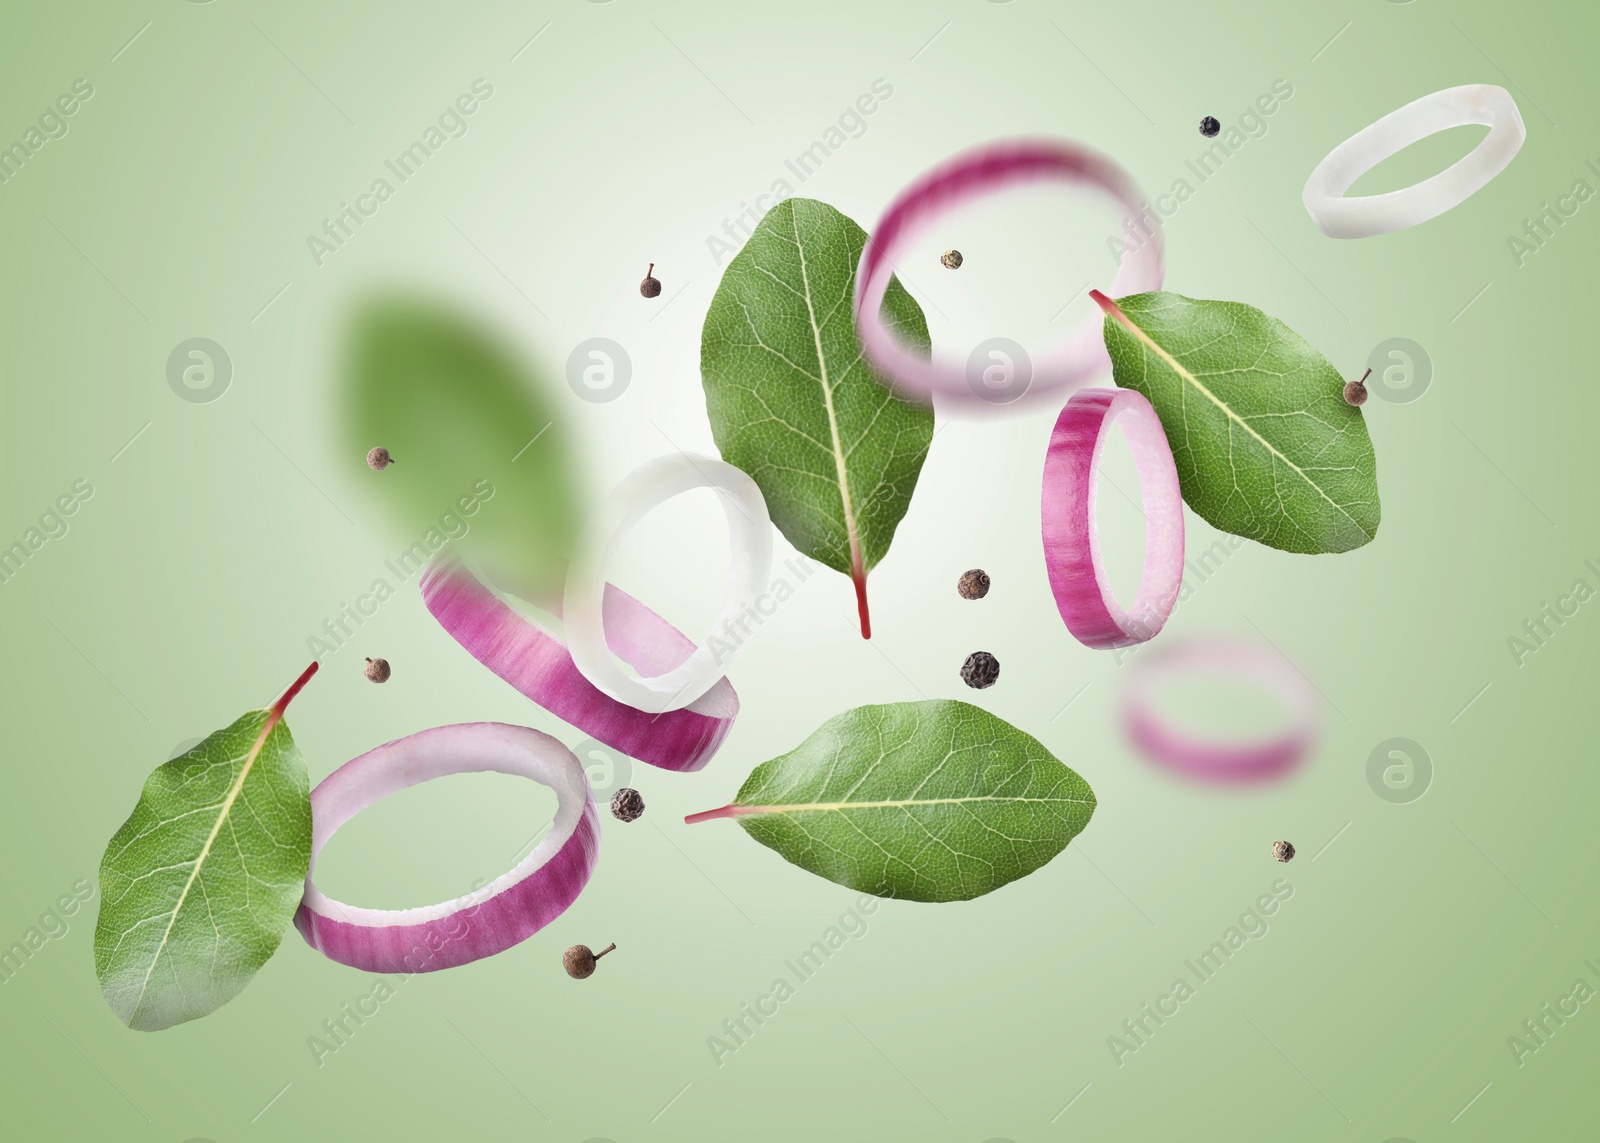 Image of Bay leaves, onion rings and black pepper grains flying on light green gradient background